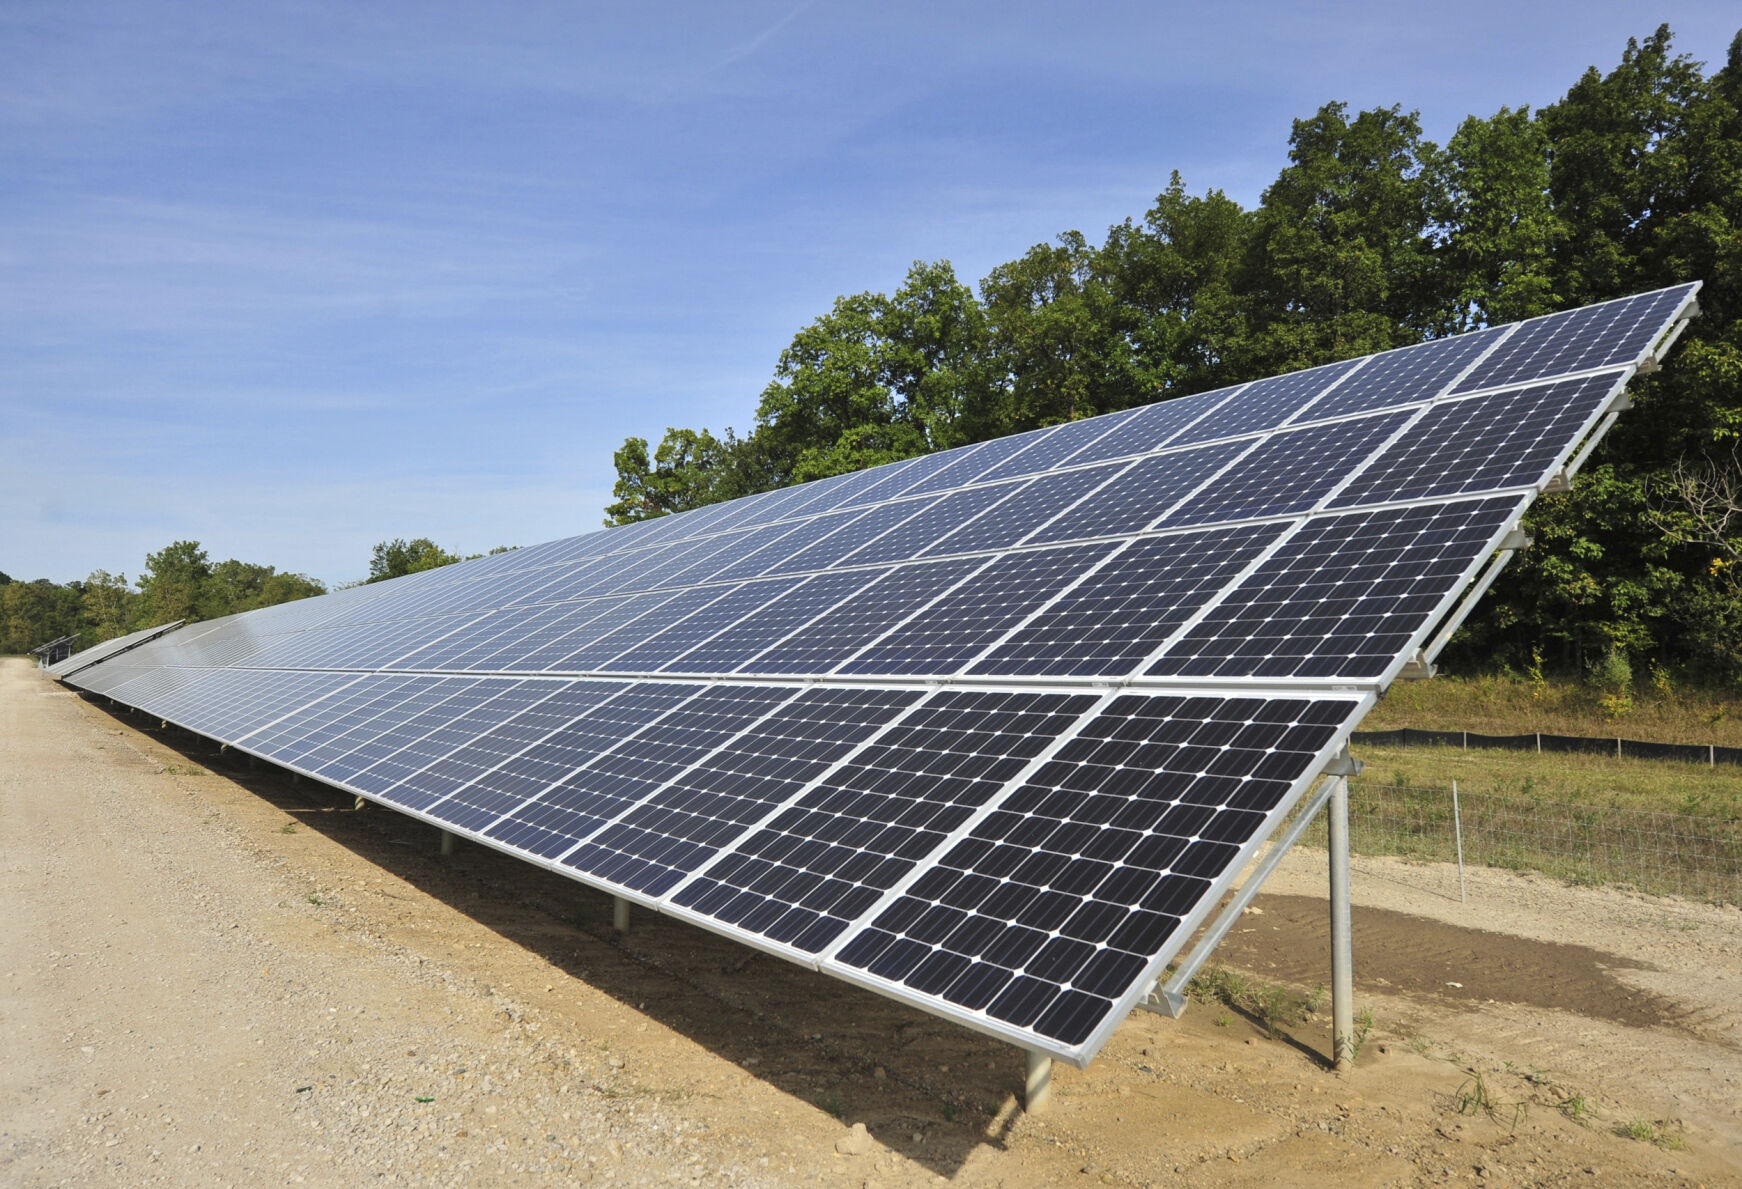 <p>FILE - One of more than 4,000 solar panels constructed by DTE Energy lines a 9.37-acre swath of land in Ann Arbor Township, Mich., Sept. 15, 2015. Michigan will join four other states in requiring utility providers to transition to 100% carbon-free energy generation by 2040 under legislation that will soon be signed by Gov. Gretchen Whitmer. (Ryan Stanton/Ann Arbor News via AP, File)</p>   PHOTO CREDIT: Ryan Stanton 